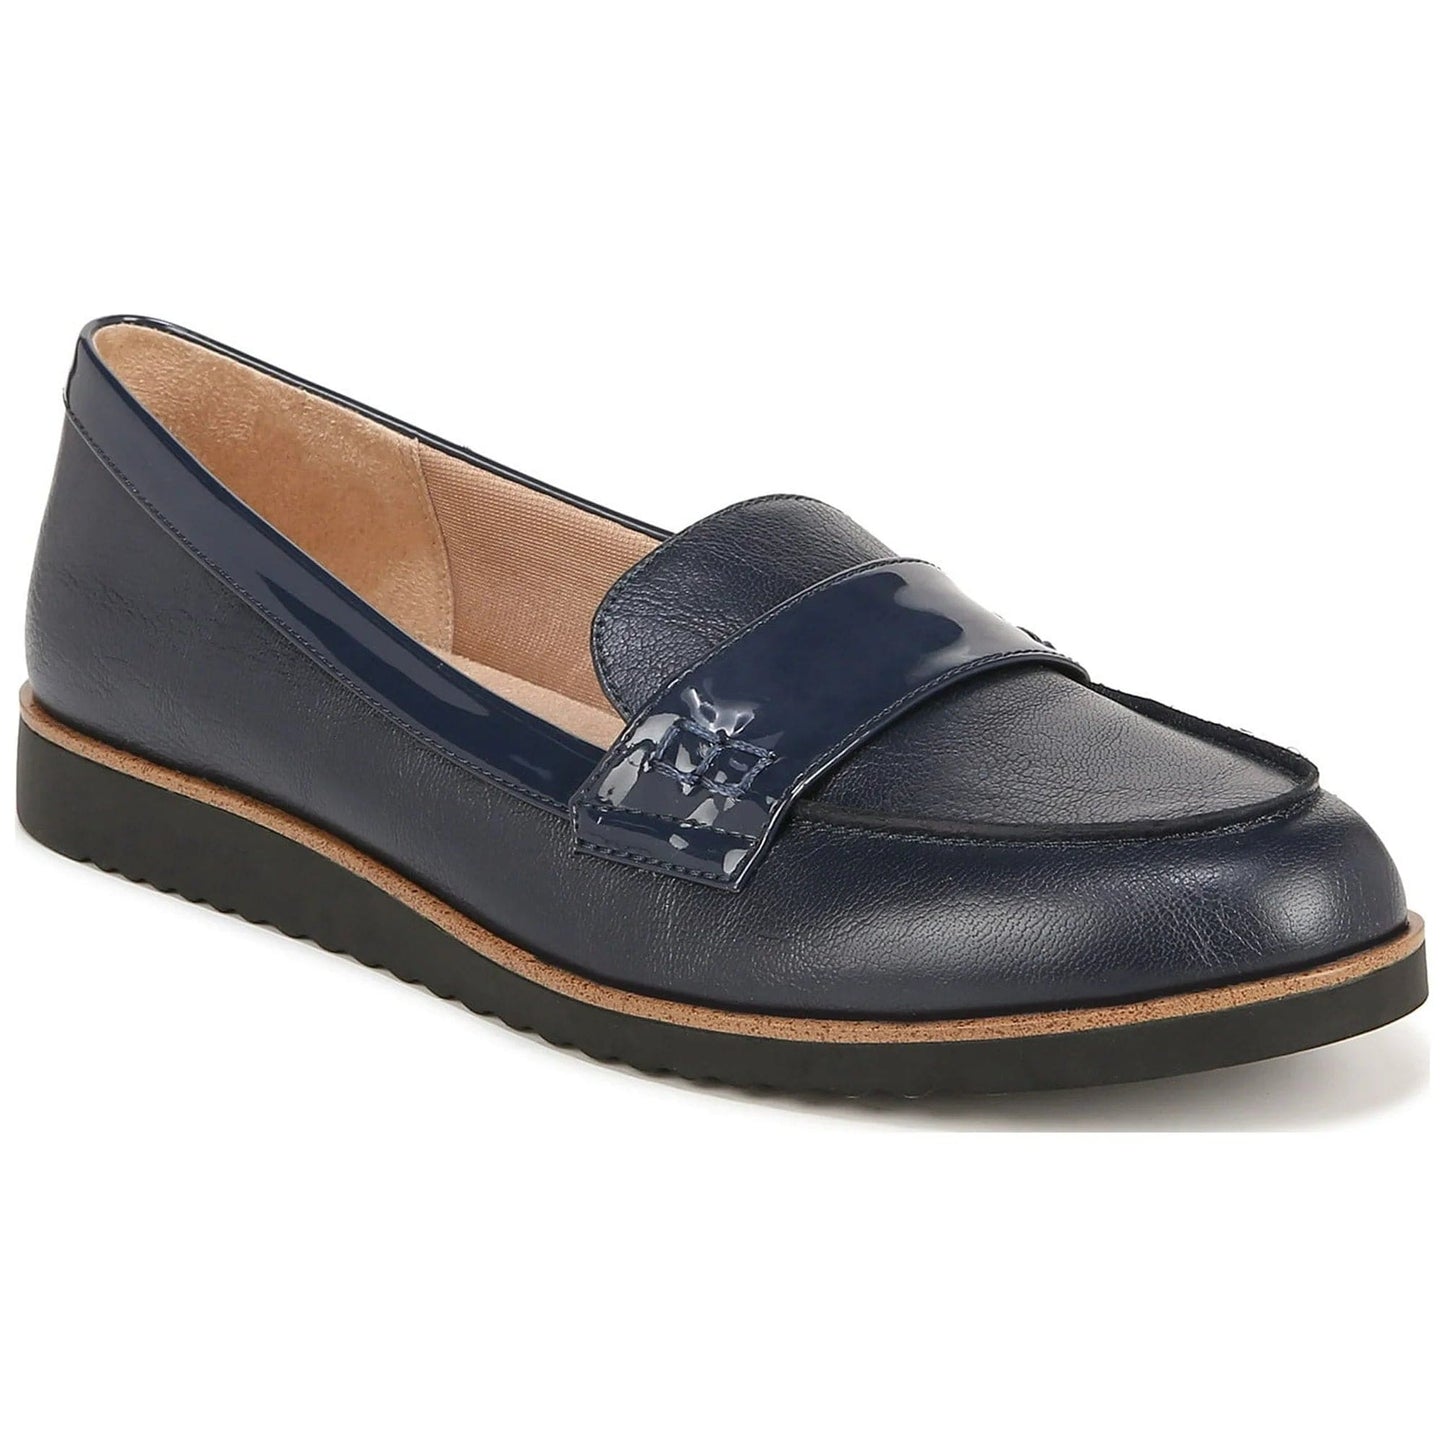 LIFESTRIDE Womens Shoes 40 / Navy LIFESTRIDE - Zee Leather Loafers